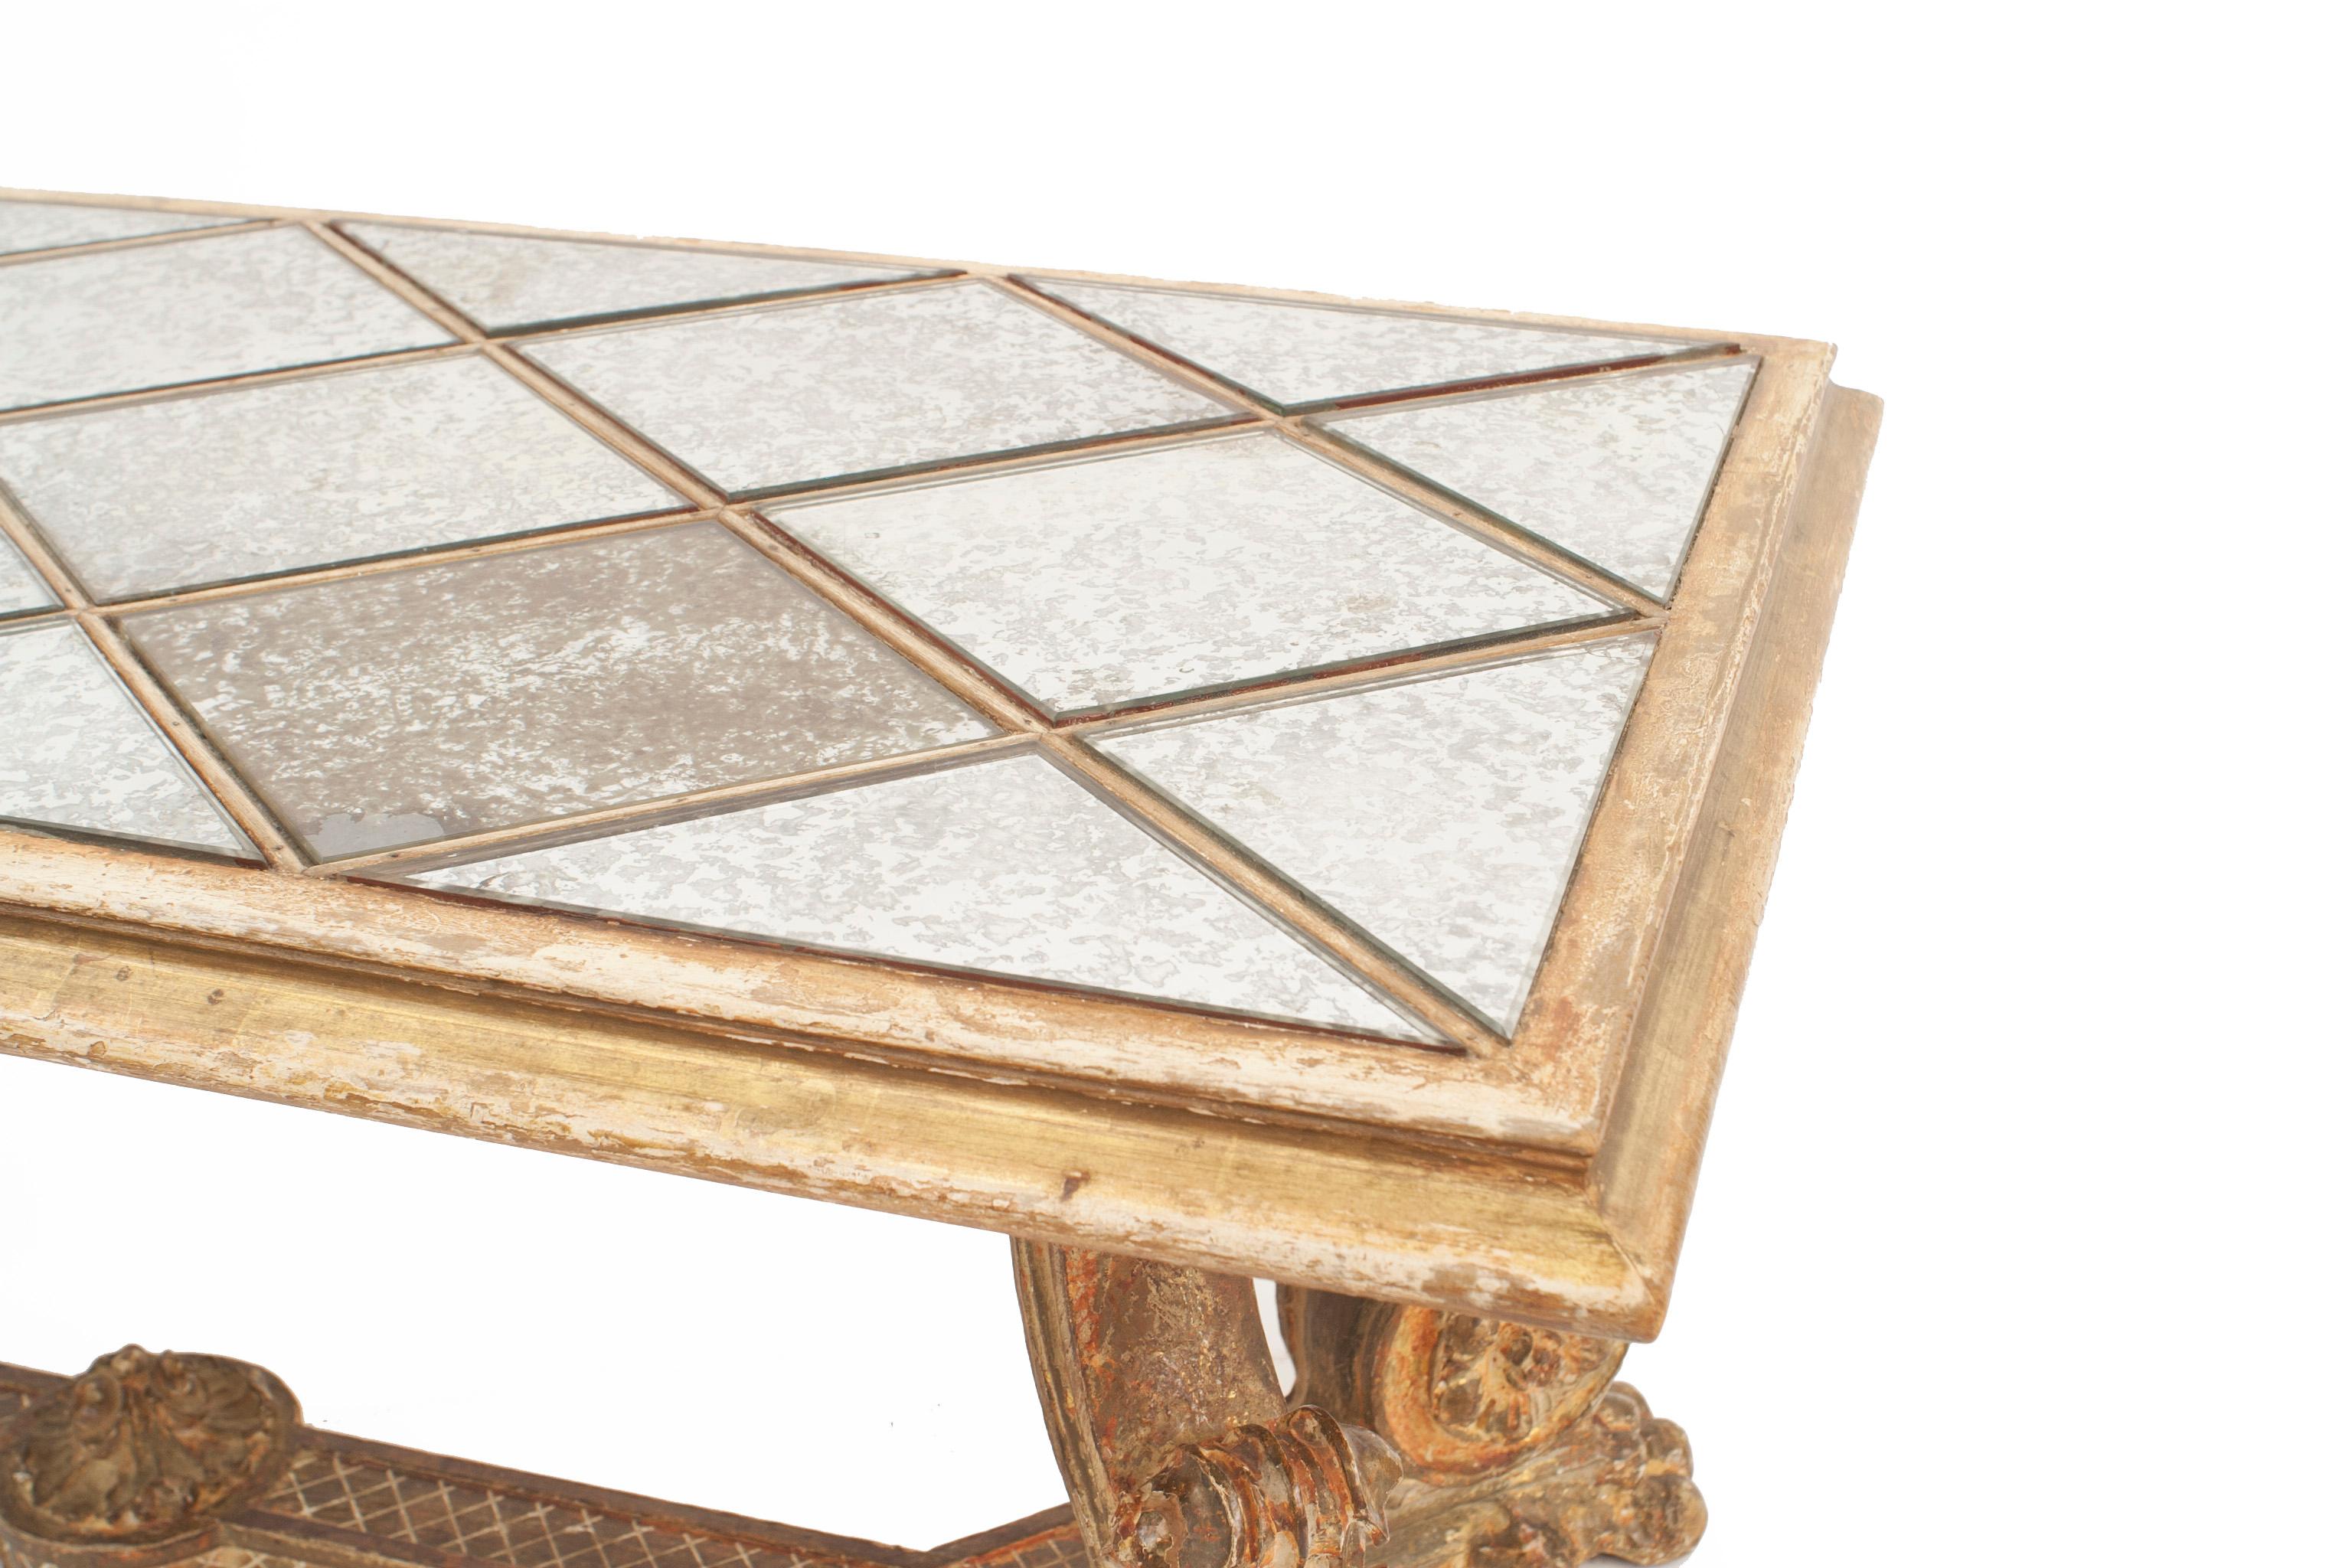 French Mid-Century (1940s) rectangular gilt oak coffee table with scroll carved legs connected with a stretcher and an inset distressed mirror diamond design top.
